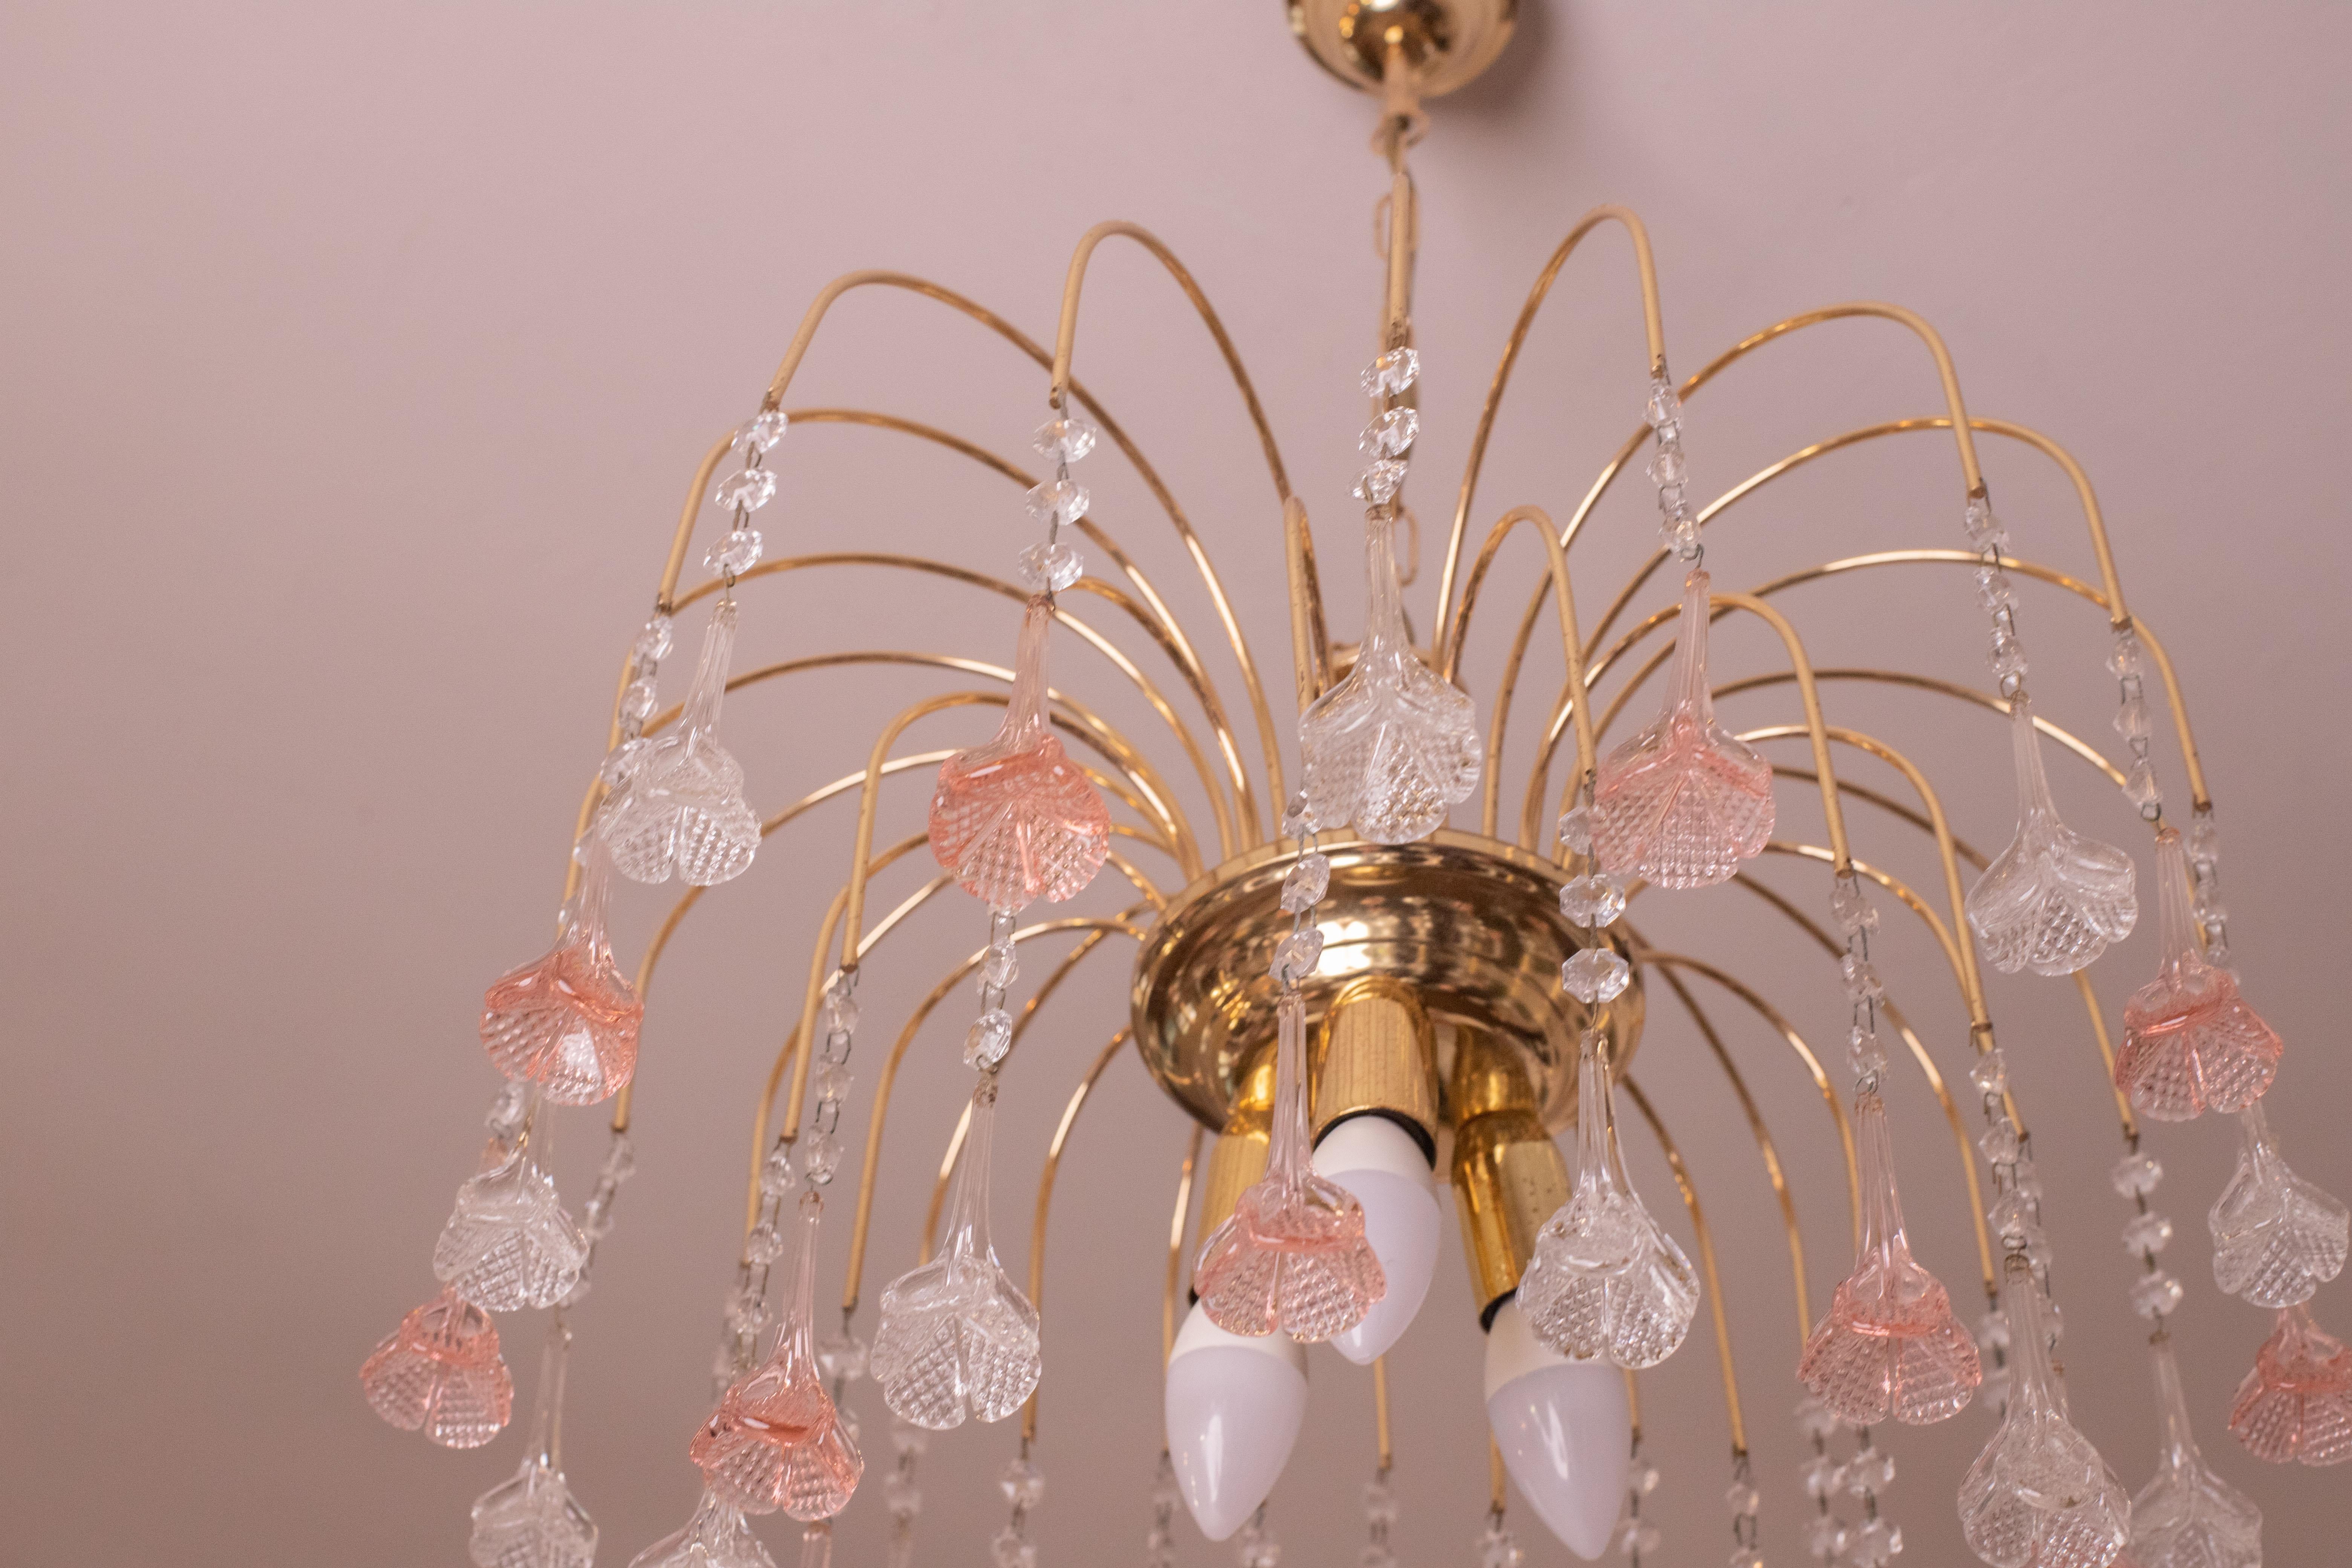 Brigitte Bardot, Pink and Trasparent Murano Flowers Chandelier, 1970s For Sale 1